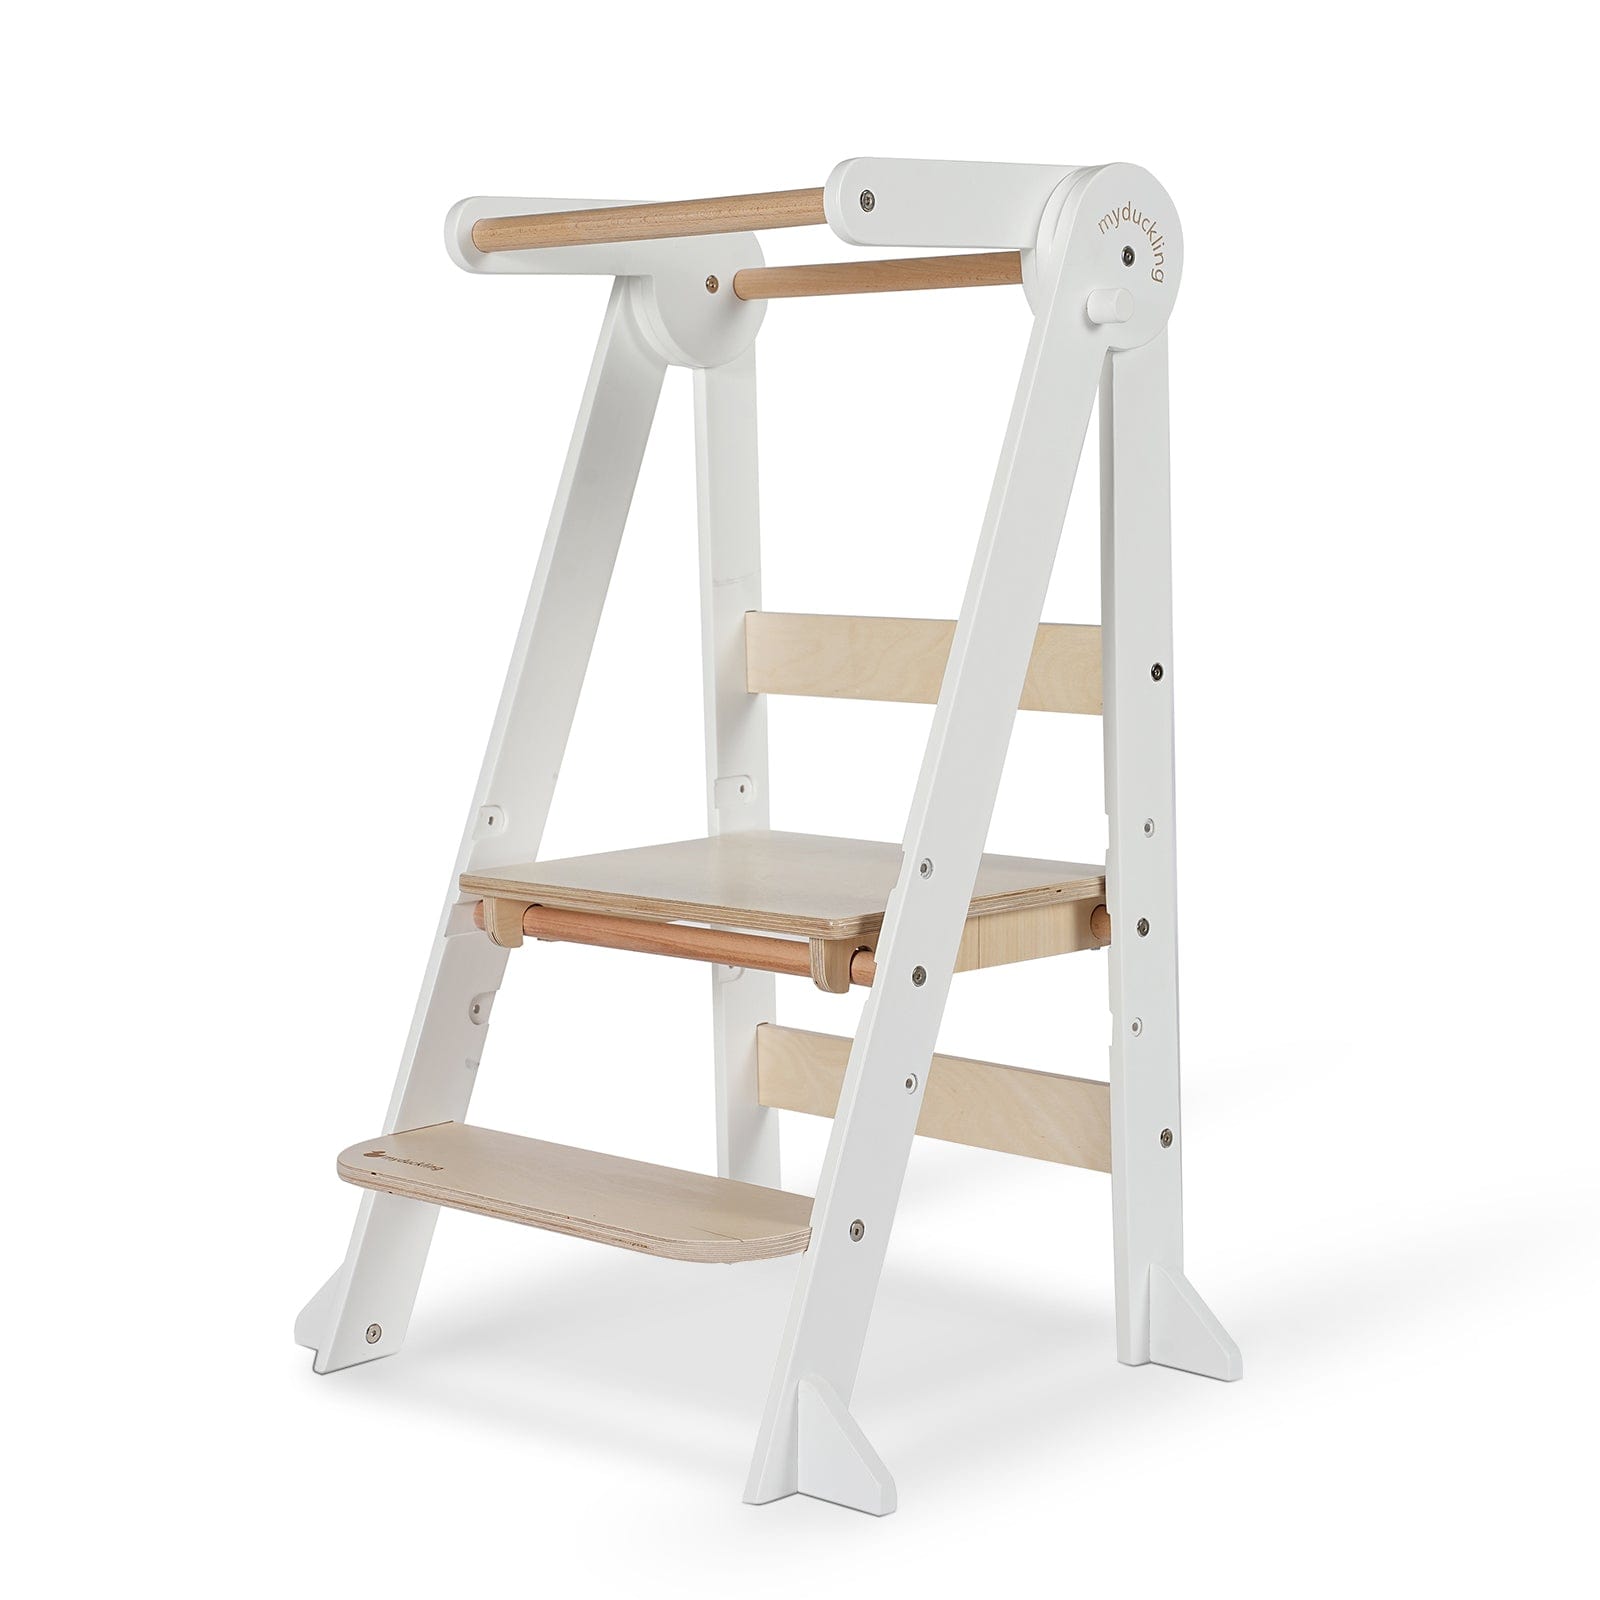 My Duckling MILA Deluxe Folding Adjustable Learning Tower White/Natural(Late-May Pre-Order)